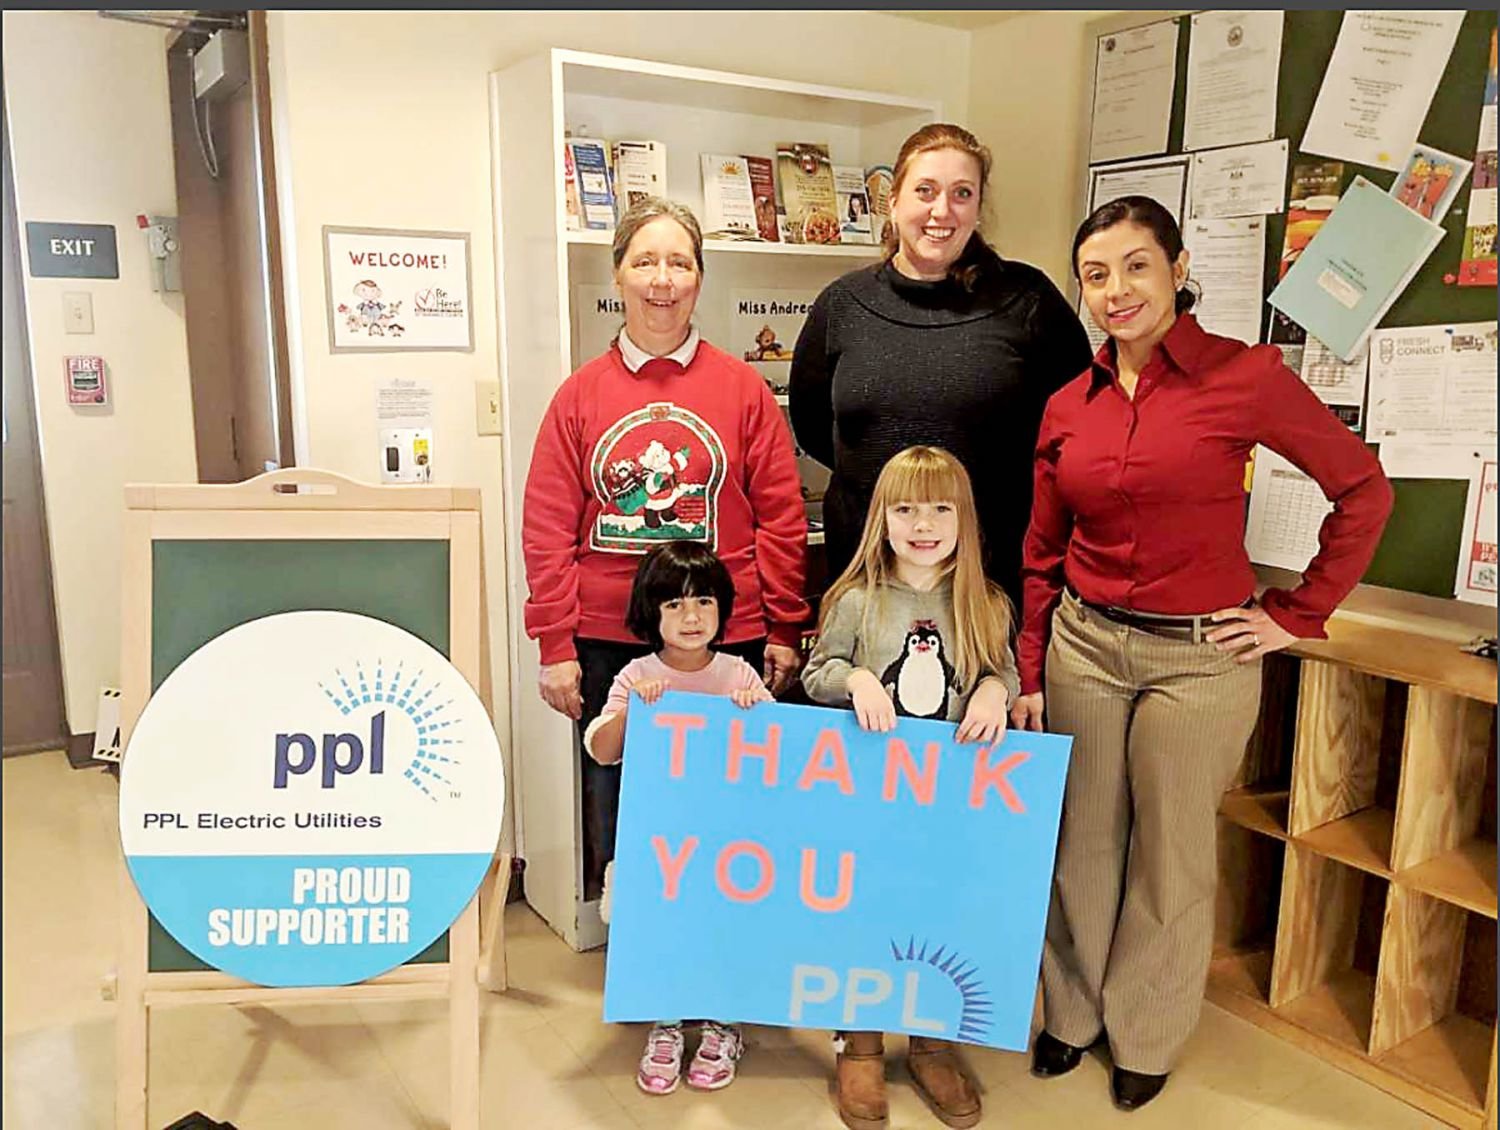 From left are: Betsy Nilsen from Children’s Developmental Program in Upper Bucks, Marissa Christie from United Way of Bucks County, Carol Obando-Derstine from PPL Electric Utilities and two of the students from the school.